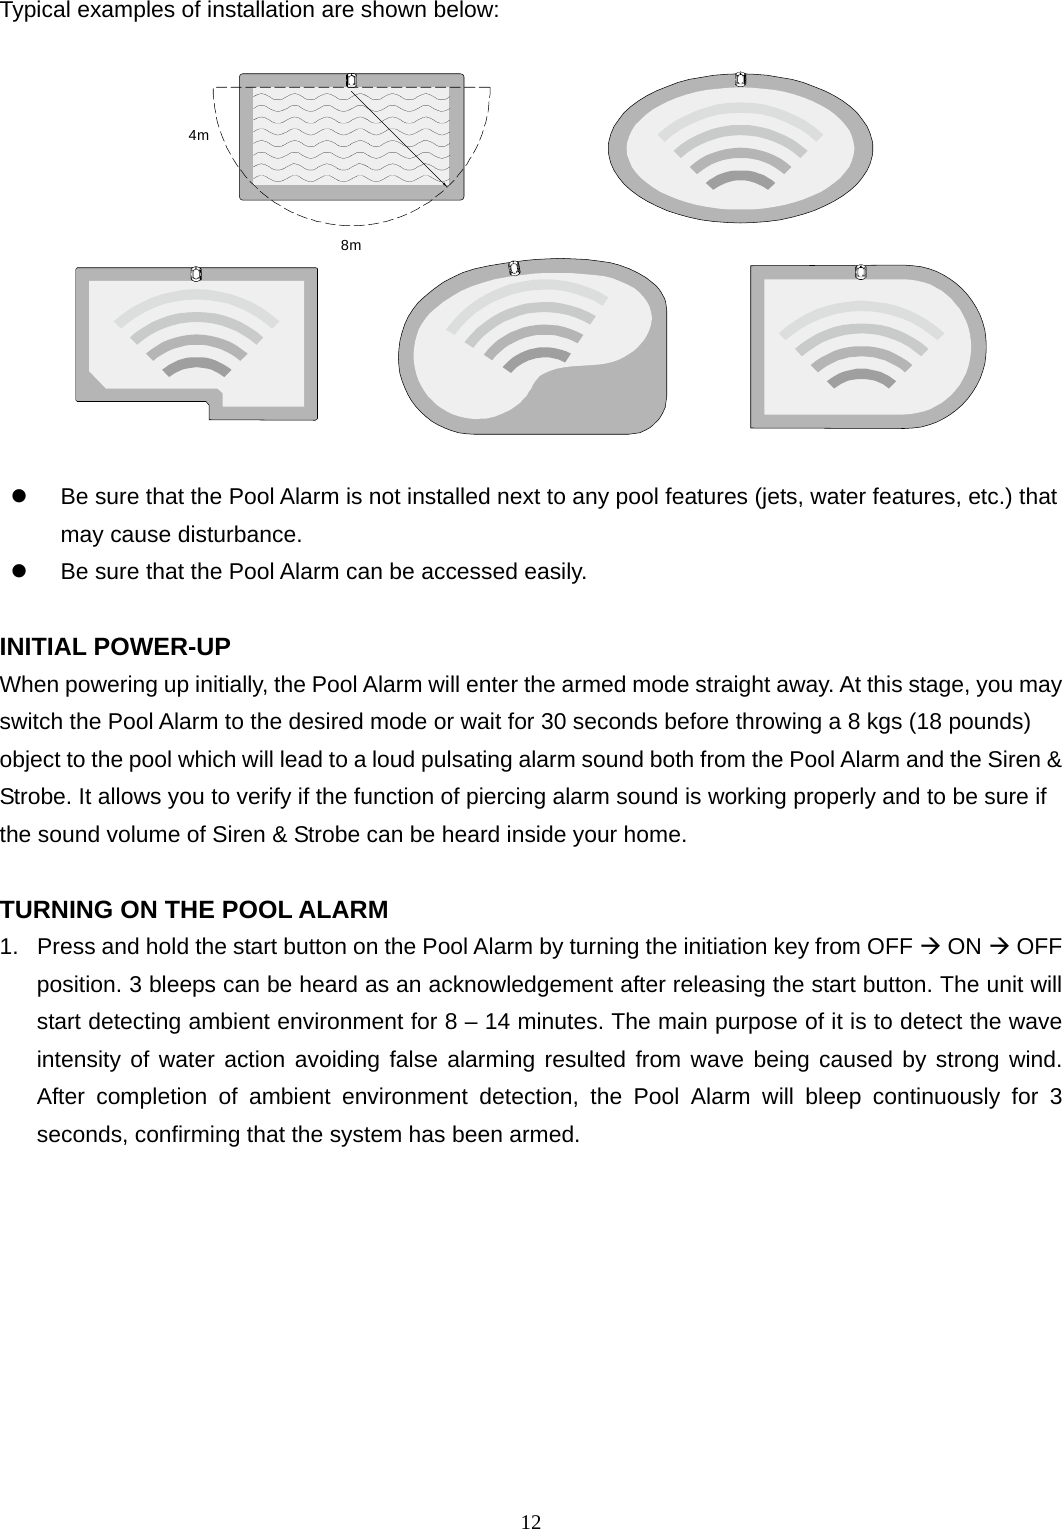 Typical examples of installation are shown below:  4m8m    Be sure that the Pool Alarm is not installed next to any pool features (jets, water features, etc.) that may cause disturbance.   Be sure that the Pool Alarm can be accessed easily.  INITIAL POWER-UP When powering up initially, the Pool Alarm will enter the armed mode straight away. At this stage, you may switch the Pool Alarm to the desired mode or wait for 30 seconds before throwing a 8 kgs (18 pounds) object to the pool which will lead to a loud pulsating alarm sound both from the Pool Alarm and the Siren &amp; Strobe. It allows you to verify if the function of piercing alarm sound is working properly and to be sure if the sound volume of Siren &amp; Strobe can be heard inside your home.  TURNING ON THE POOL ALARM 1.  Press and hold the start button on the Pool Alarm by turning the initiation key from OFF  ON  OFF position. 3 bleeps can be heard as an acknowledgement after releasing the start button. The unit will start detecting ambient environment for 8 – 14 minutes. The main purpose of it is to detect the wave intensity of water action avoiding false alarming resulted from wave being caused by strong wind. After completion of ambient environment detection, the Pool Alarm will bleep continuously for 3 seconds, confirming that the system has been armed.     12 